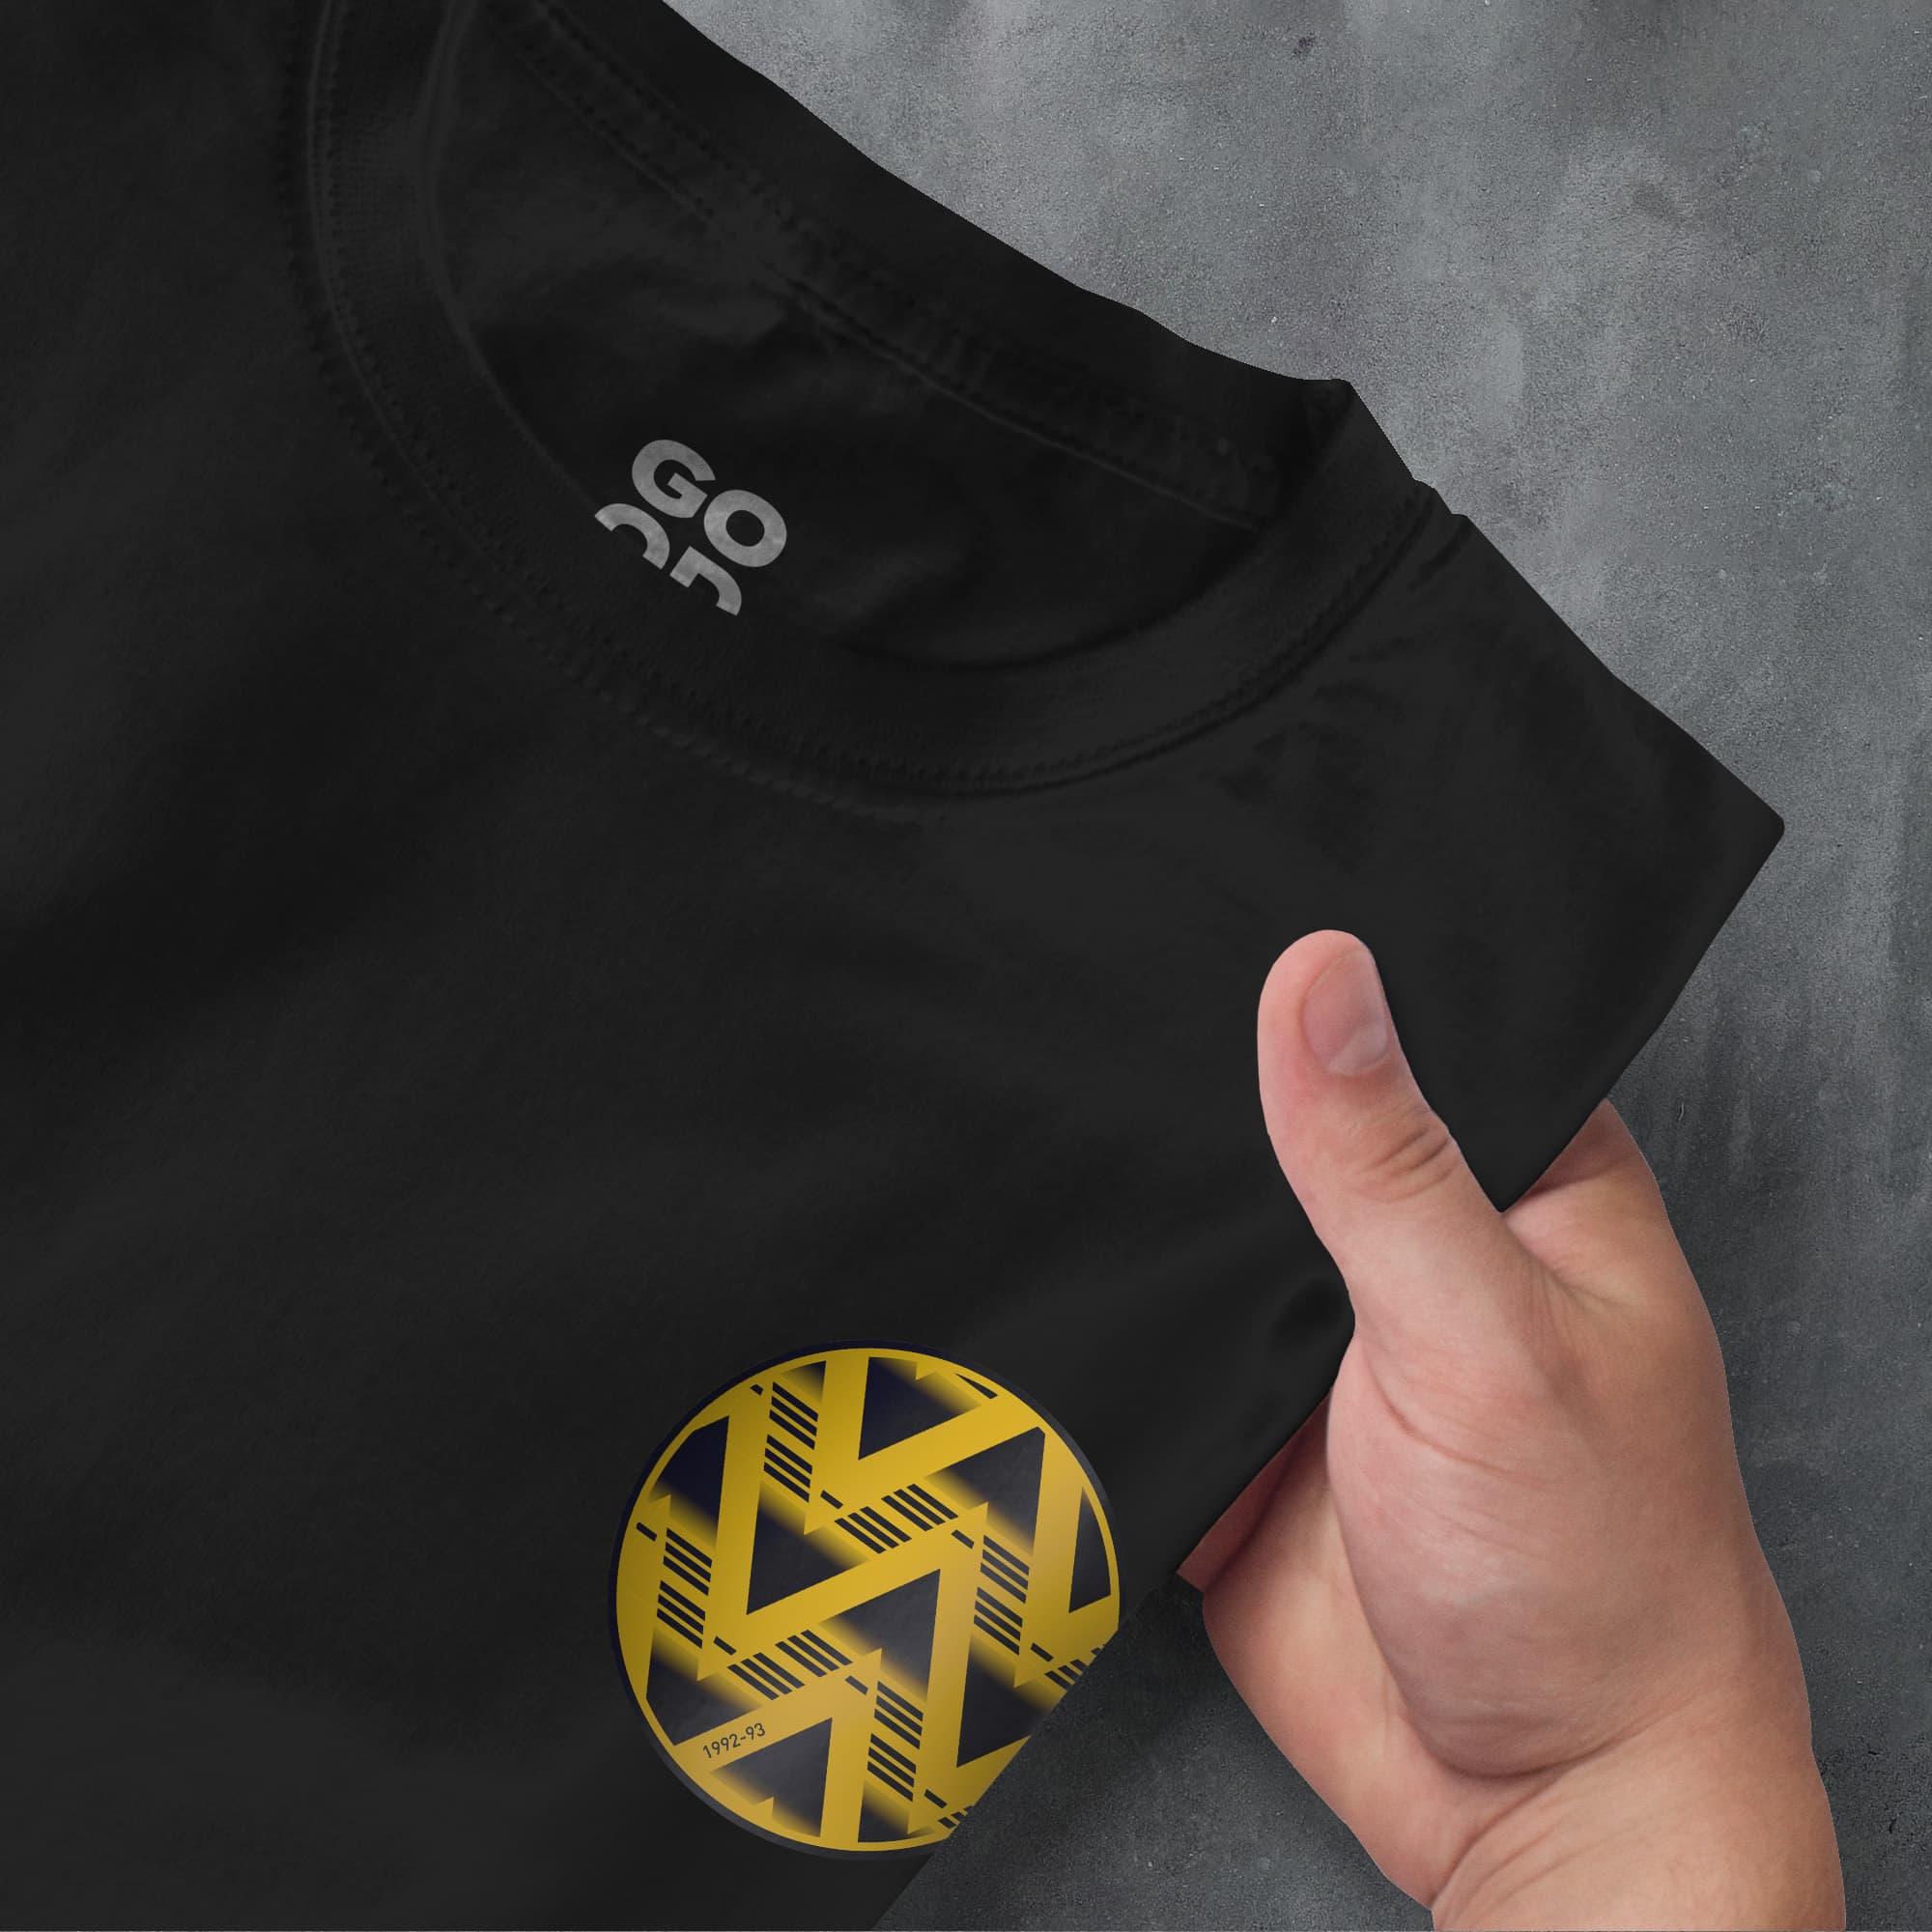 a person holding a black shirt with a yellow logo on it